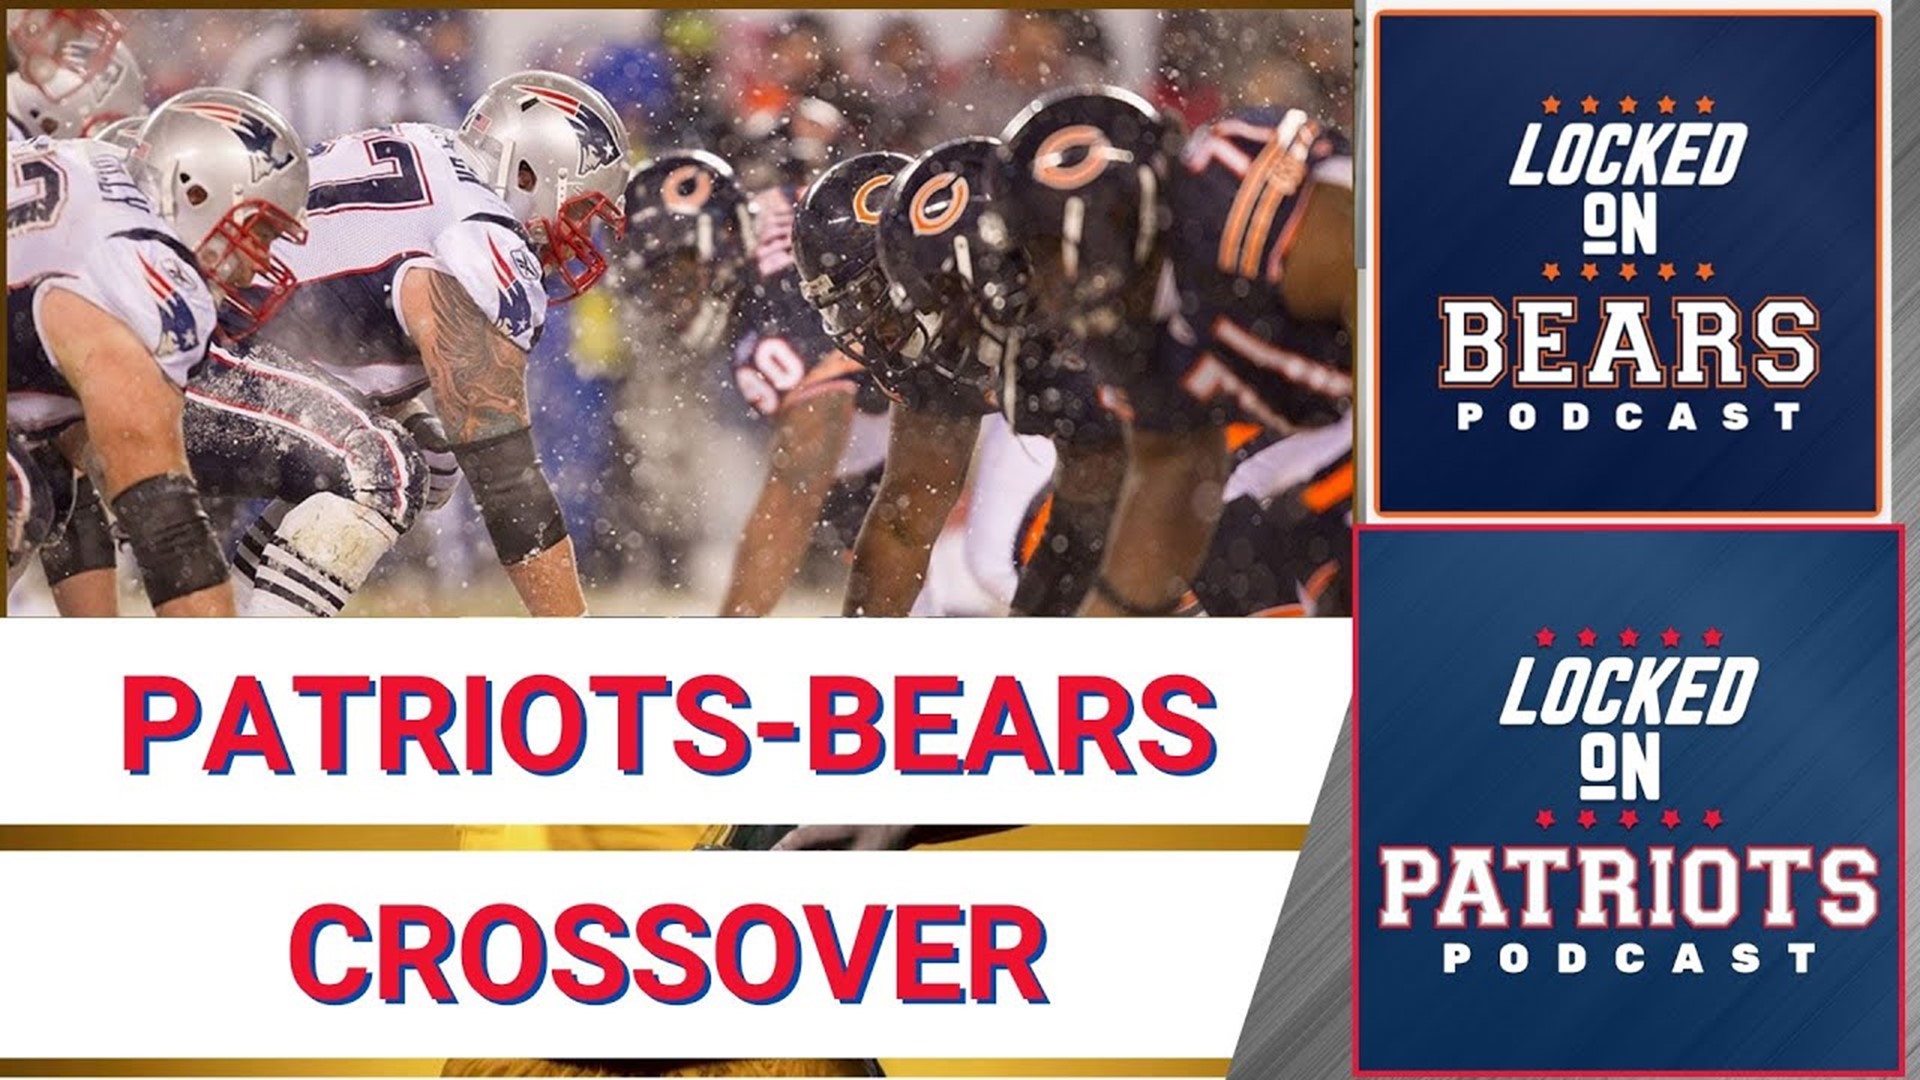 Join hosts Mike D’Abate of Locked On Patriots and Lorin Cox of Locked On Bears as they preview Monday night’s showdown.